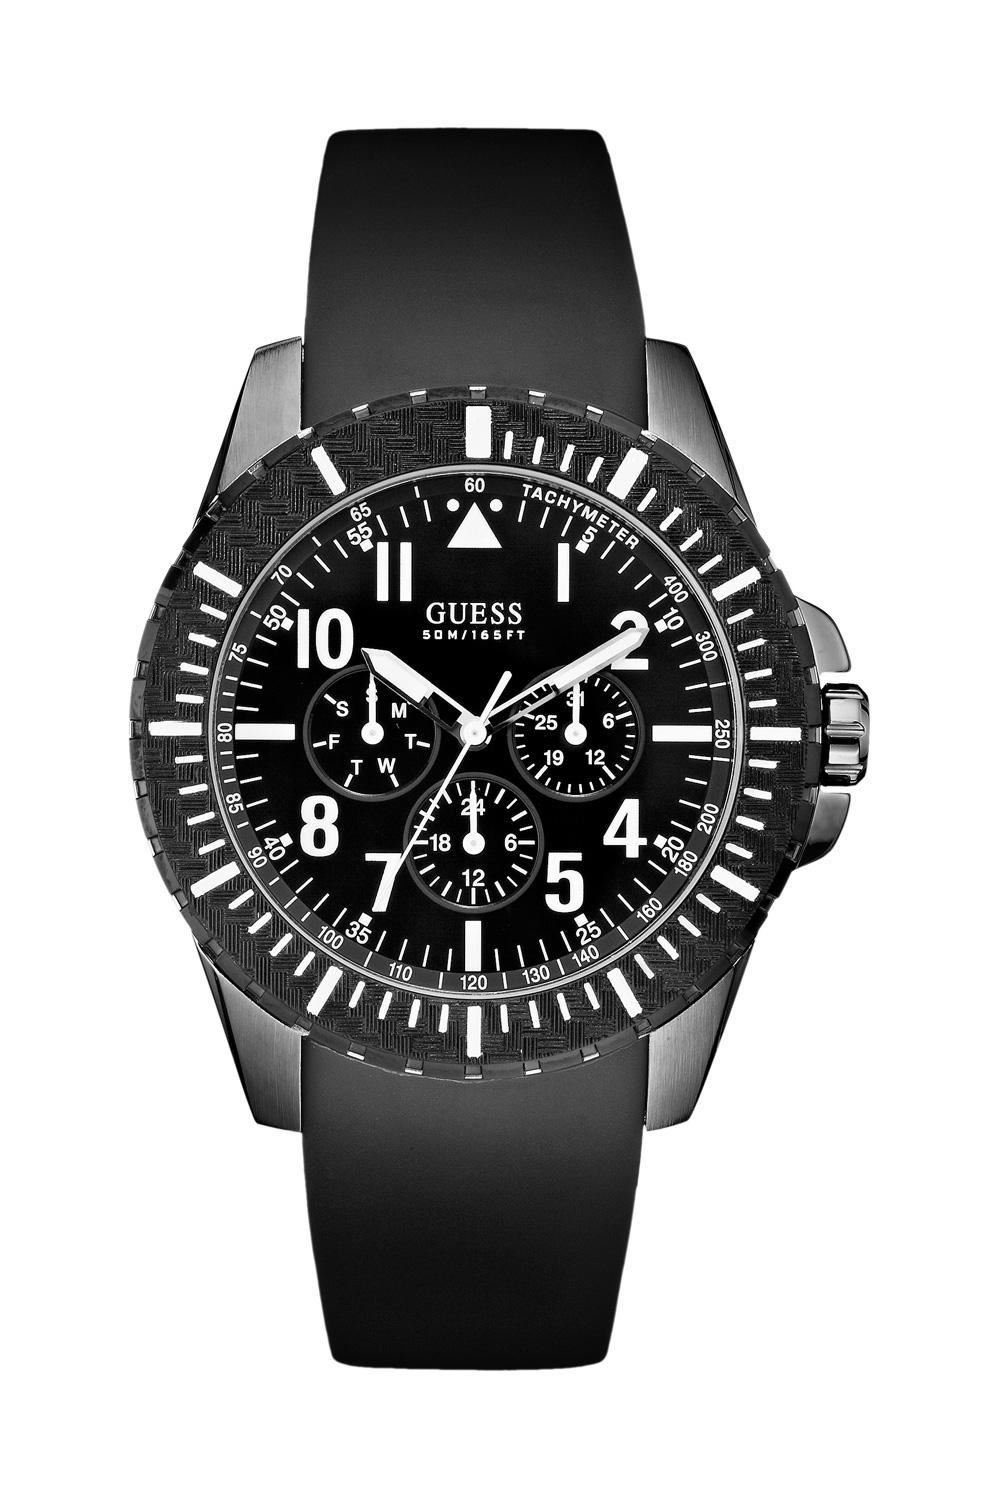 24-Std. Multifunktion, Multifunktionsuhr Anzeige, Rogue Guess W10261G1, Tachymeter